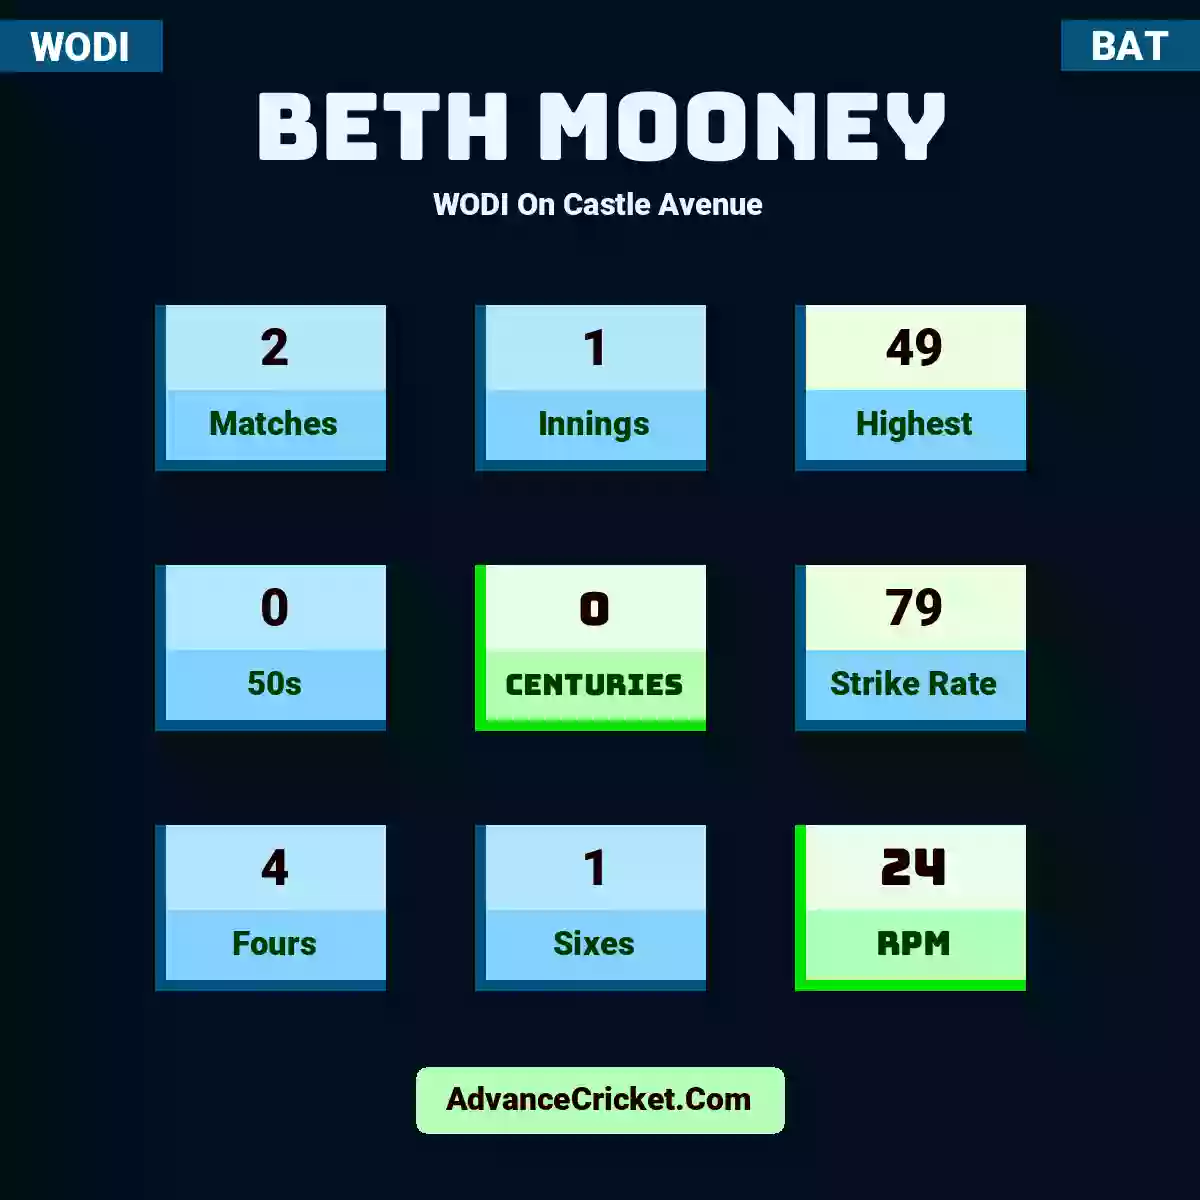 Beth Mooney WODI  On Castle Avenue, Beth Mooney played 2 matches, scored 49 runs as highest, 0 half-centuries, and 0 centuries, with a strike rate of 79. B.Mooney hit 4 fours and 1 sixes, with an RPM of 24.